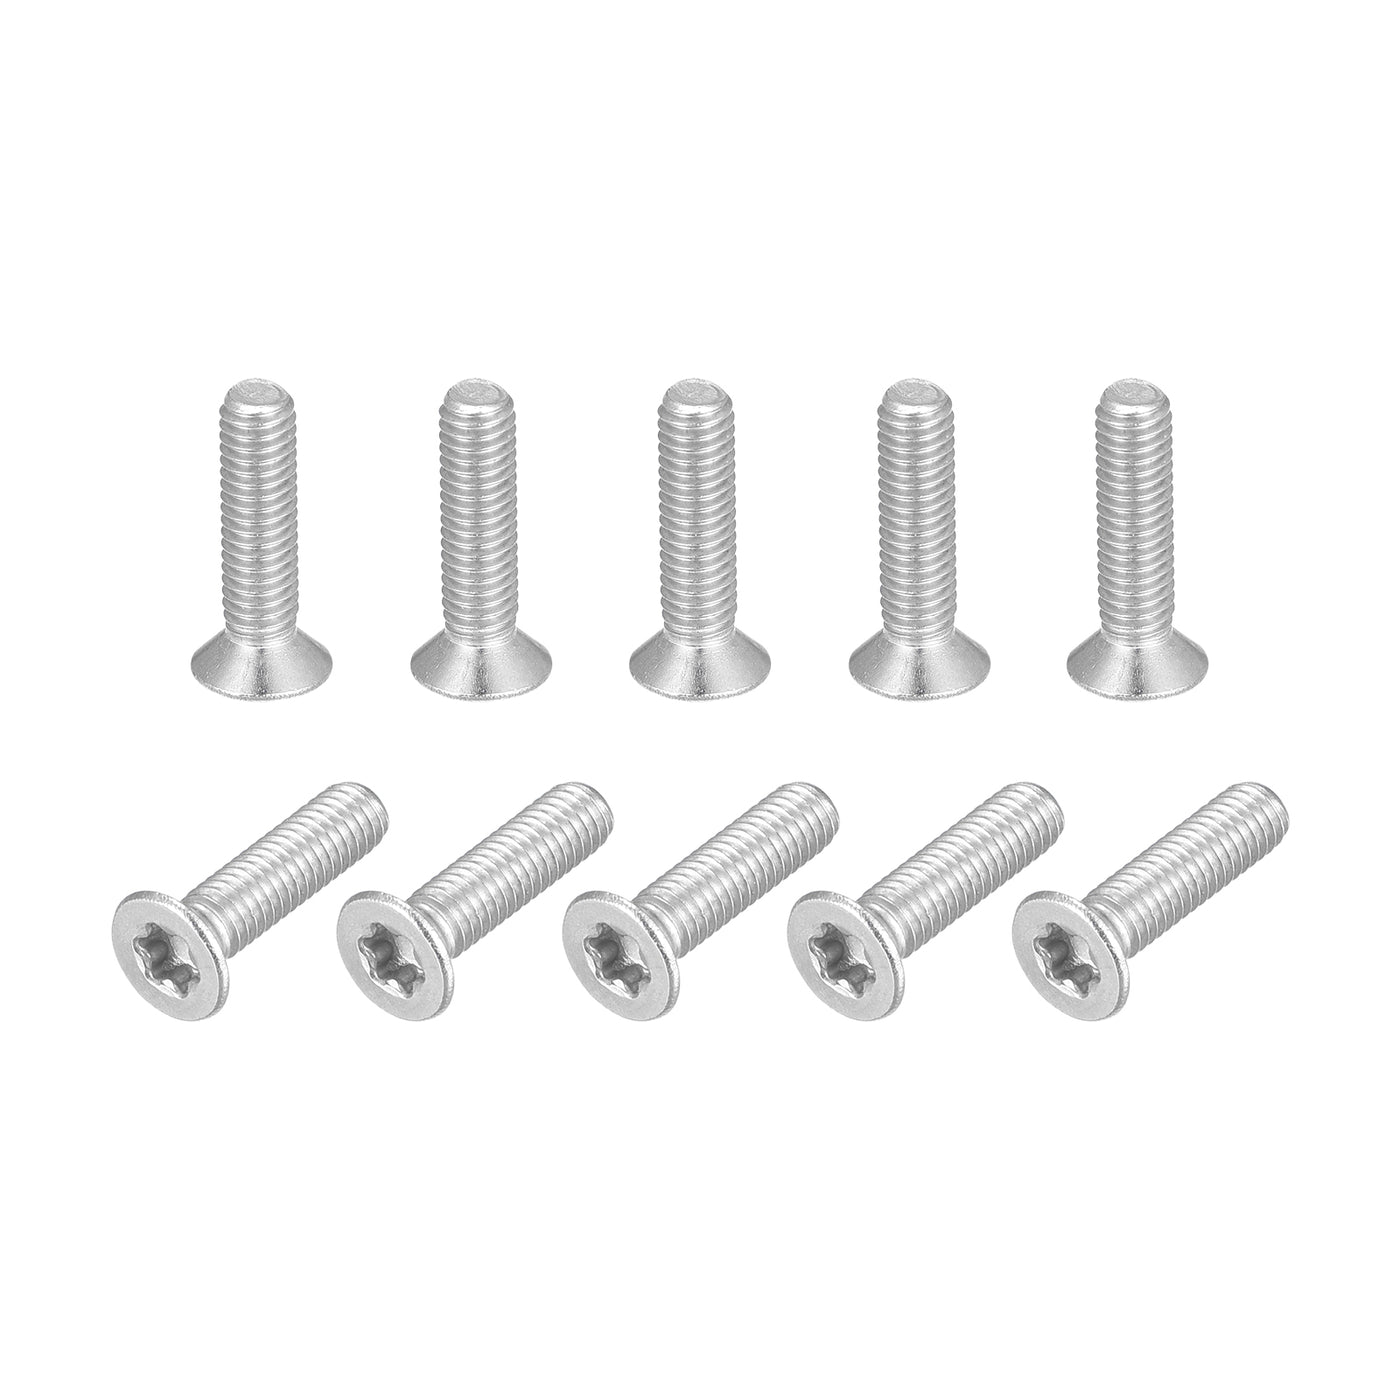 uxcell Uxcell M3x12mm Torx Security Screws, 20pcs 316 Stainless Steel Countersunk Head Screw